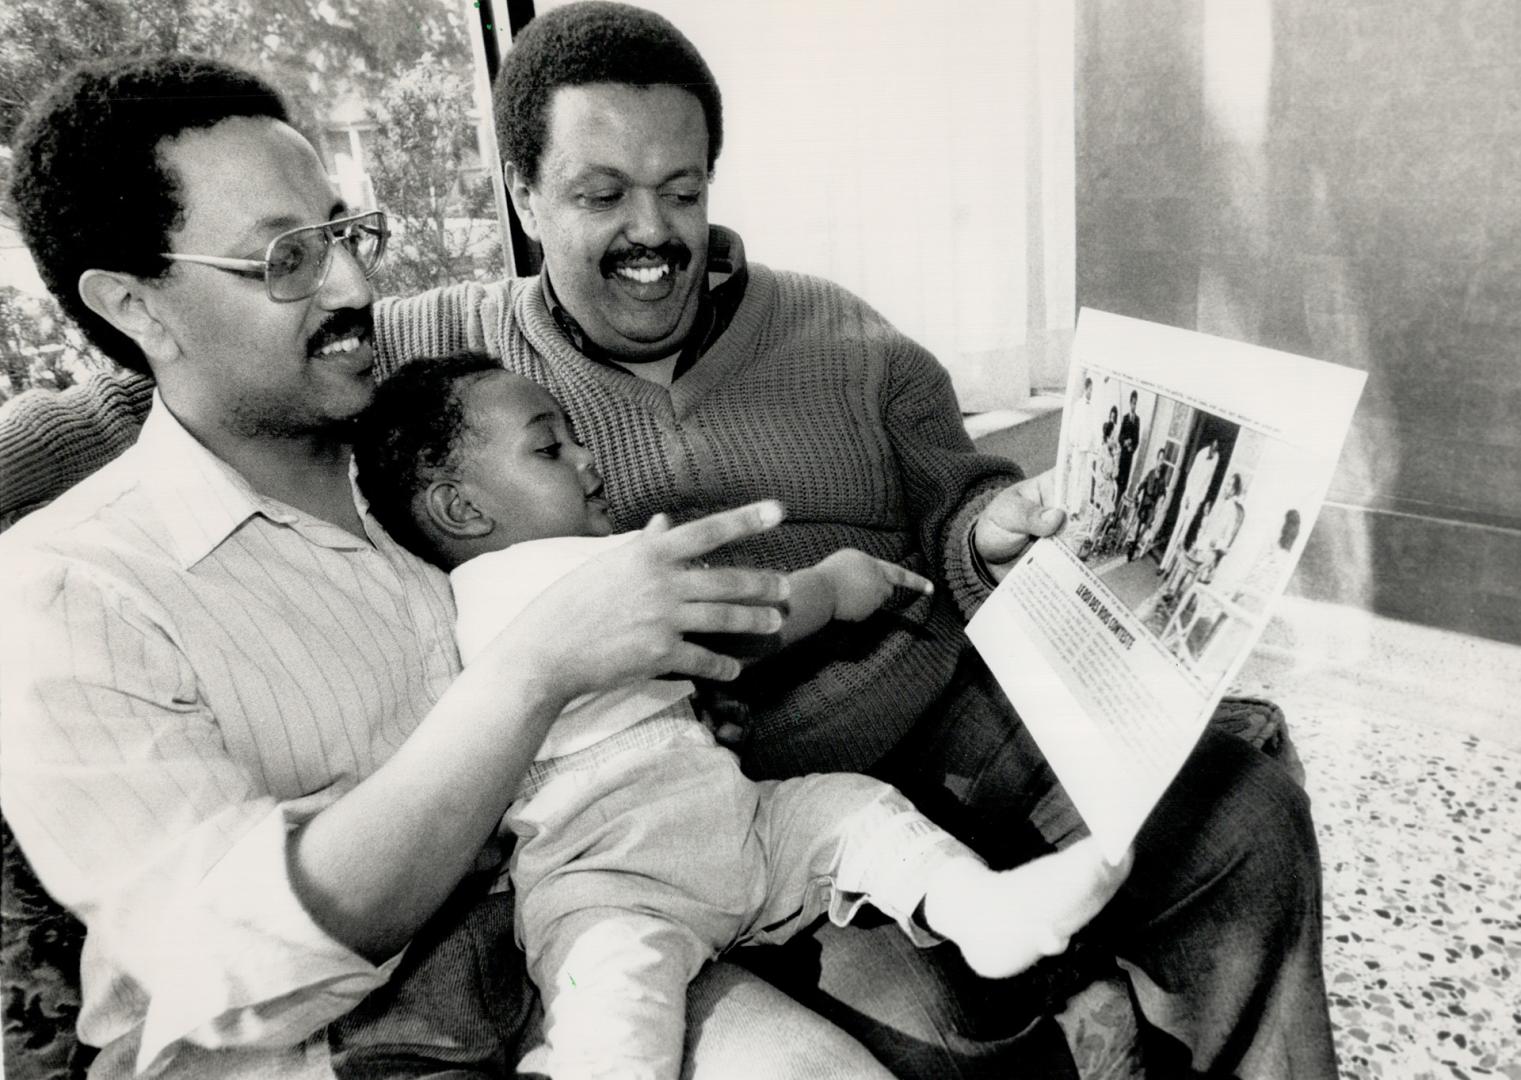 Mother released: Stephen Mengesha, right, his daughter Araya and brother Jalye look at a photo of relatives of theirs with Emperor Haile Selassie of Ethiopia